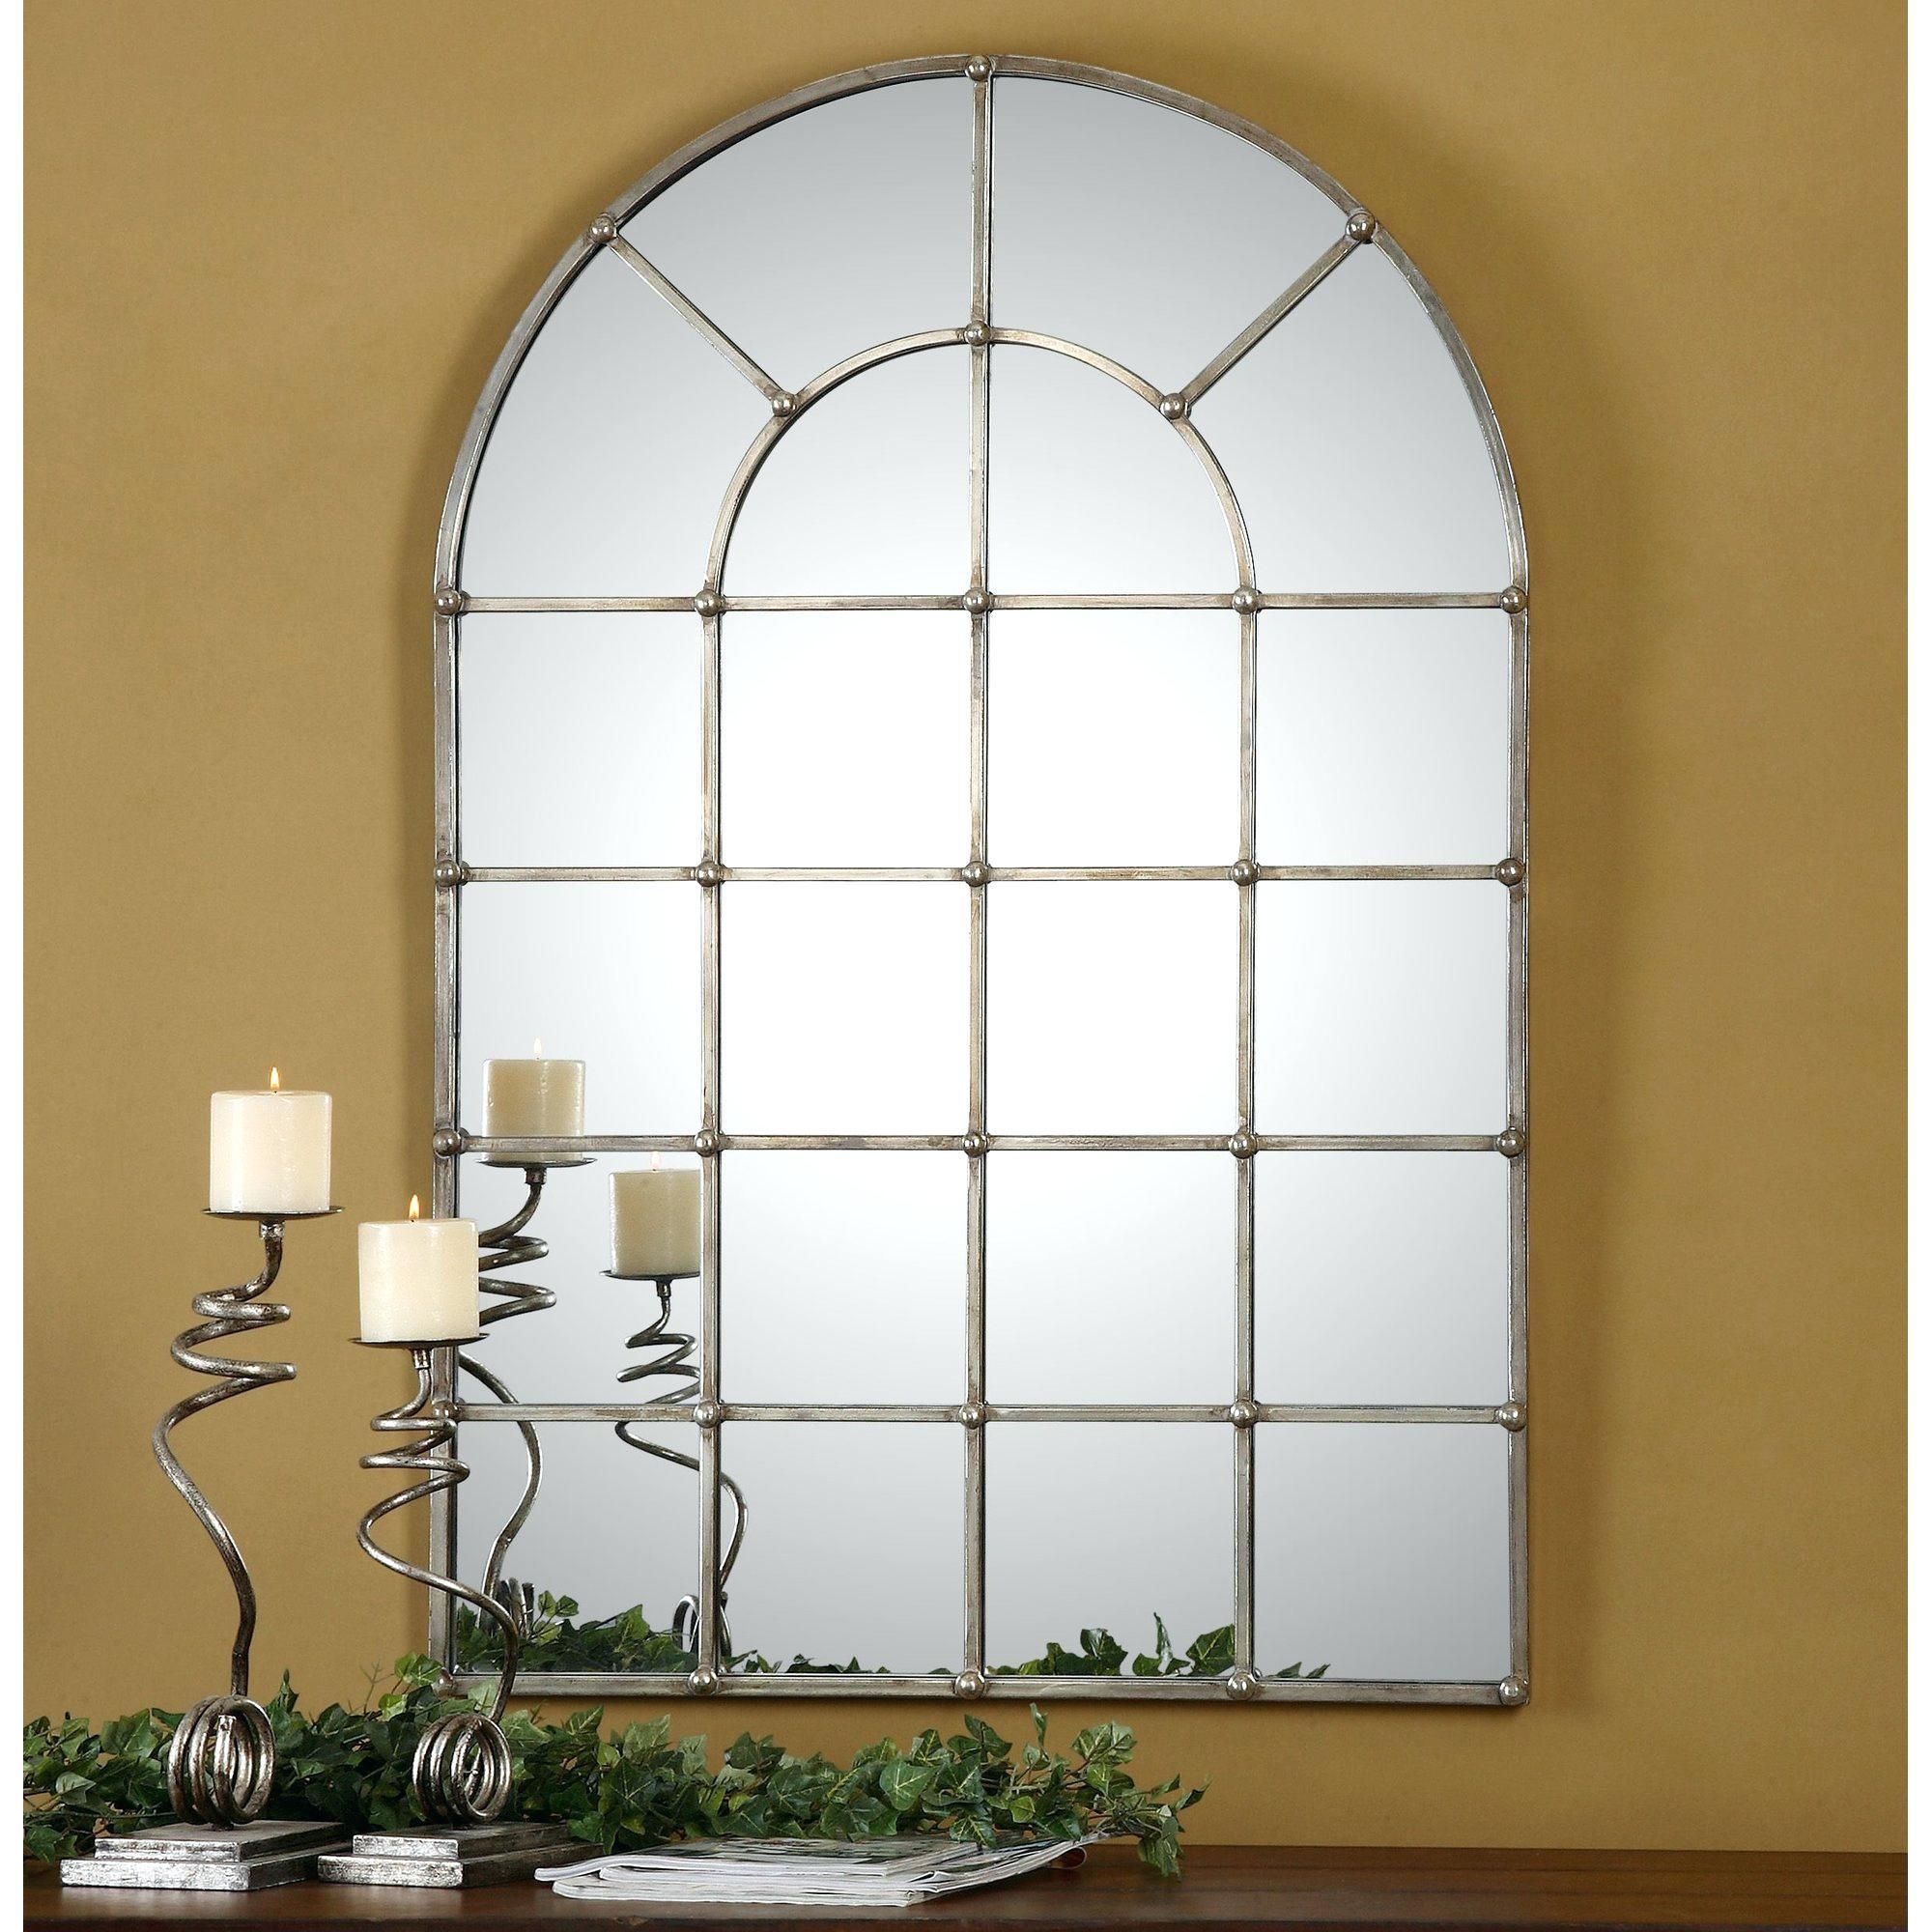 Wall Mirror Shabby Chic Arched Window Panes 24 X 16Arch Garden Pertaining To Metal Garden Mirror (View 18 of 20)